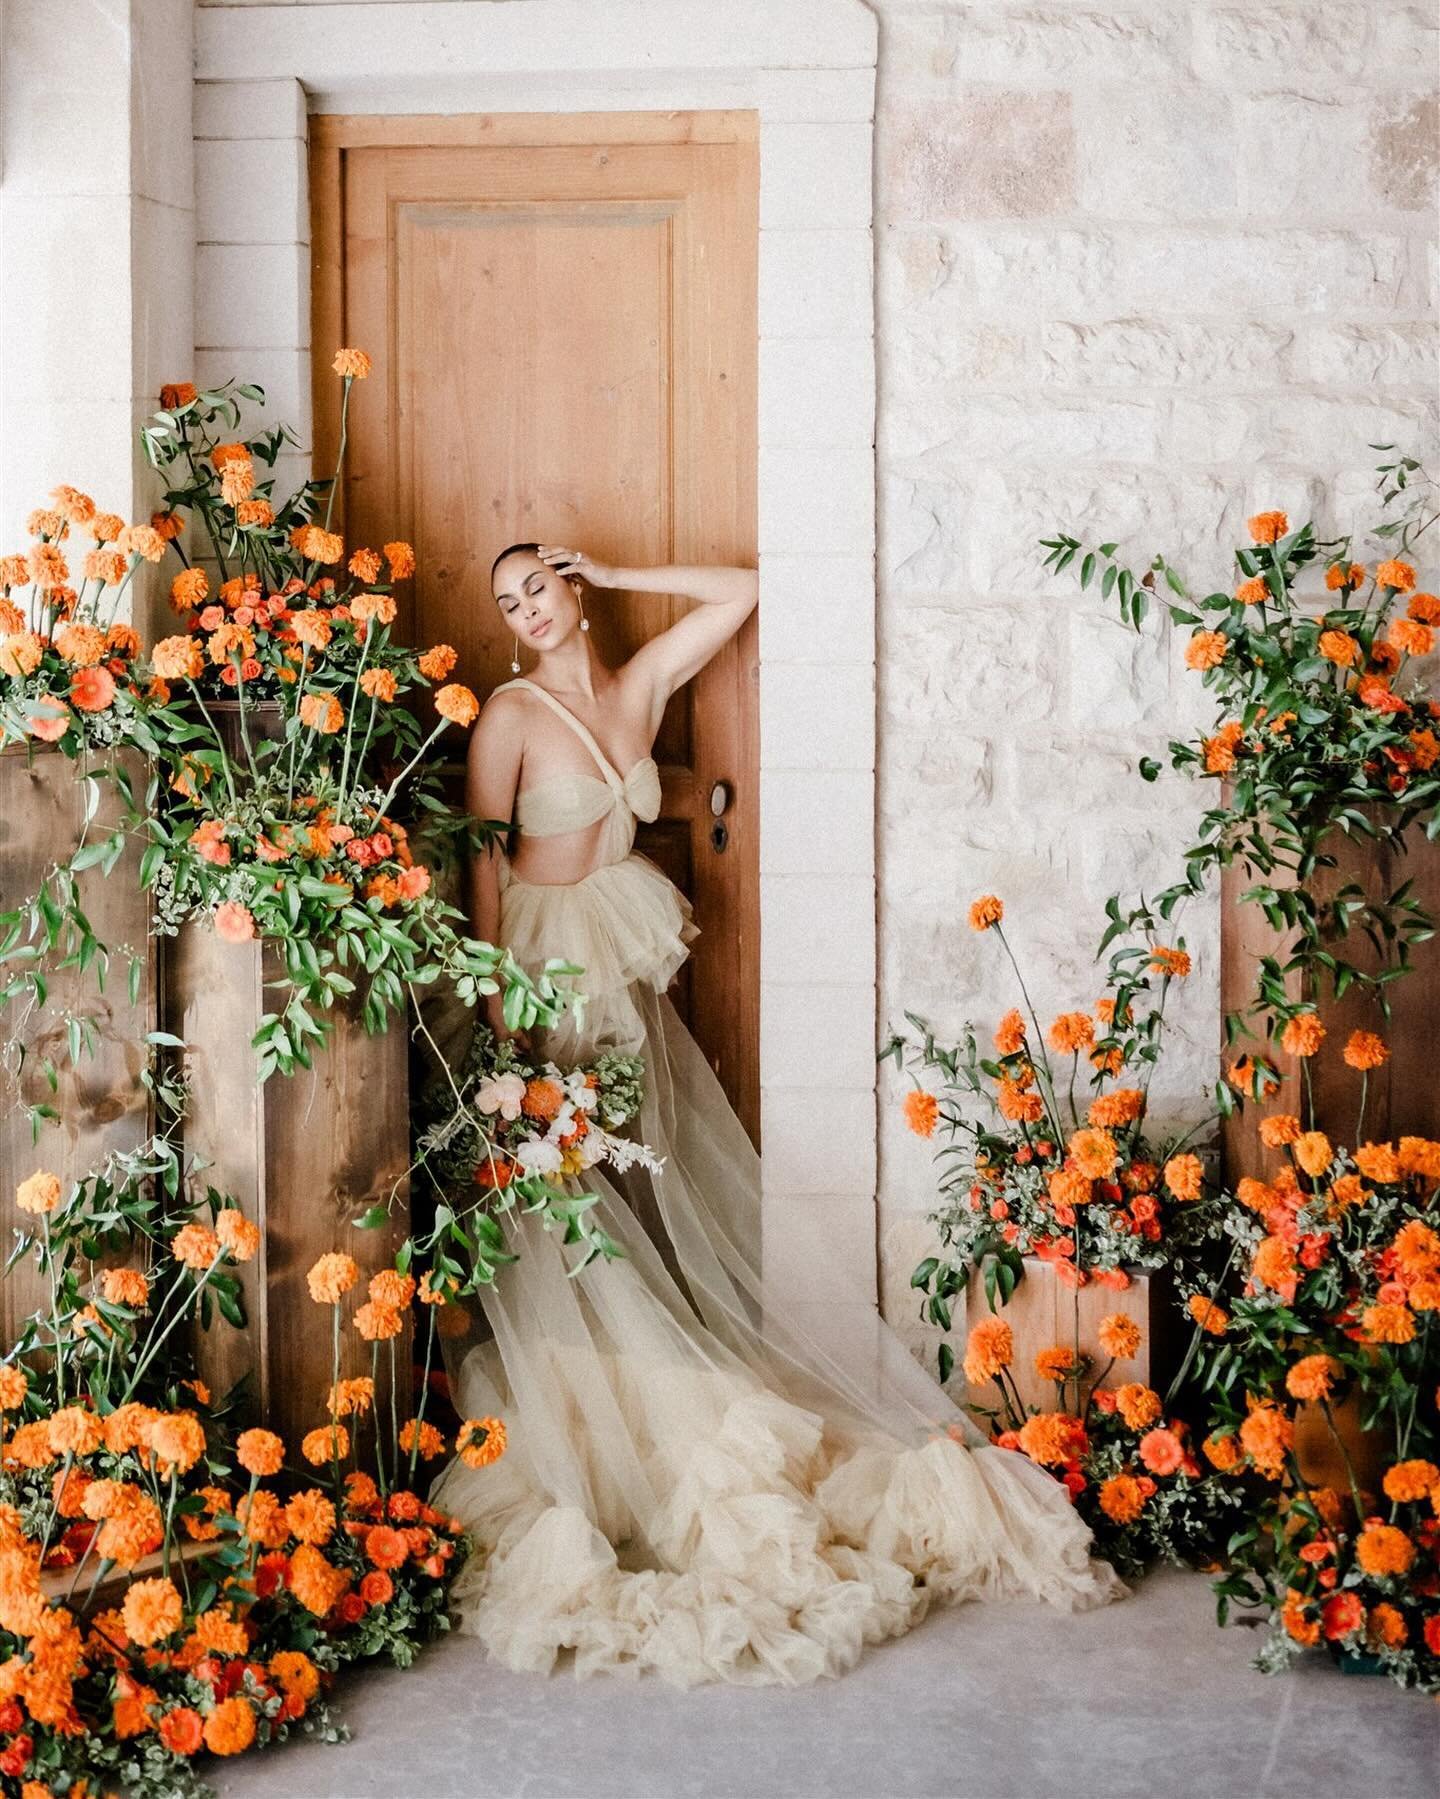 Loved how bold and bright this marigold installation turned out! Sometimes simplicity is all you need 🧡

Host: @styledshootsacrossamerica 
Planning: @heatherbengeofficial 
Assistant Planners: @alexiawoolumssaa @amodernfete @lacedwithgraceinfo @akbri